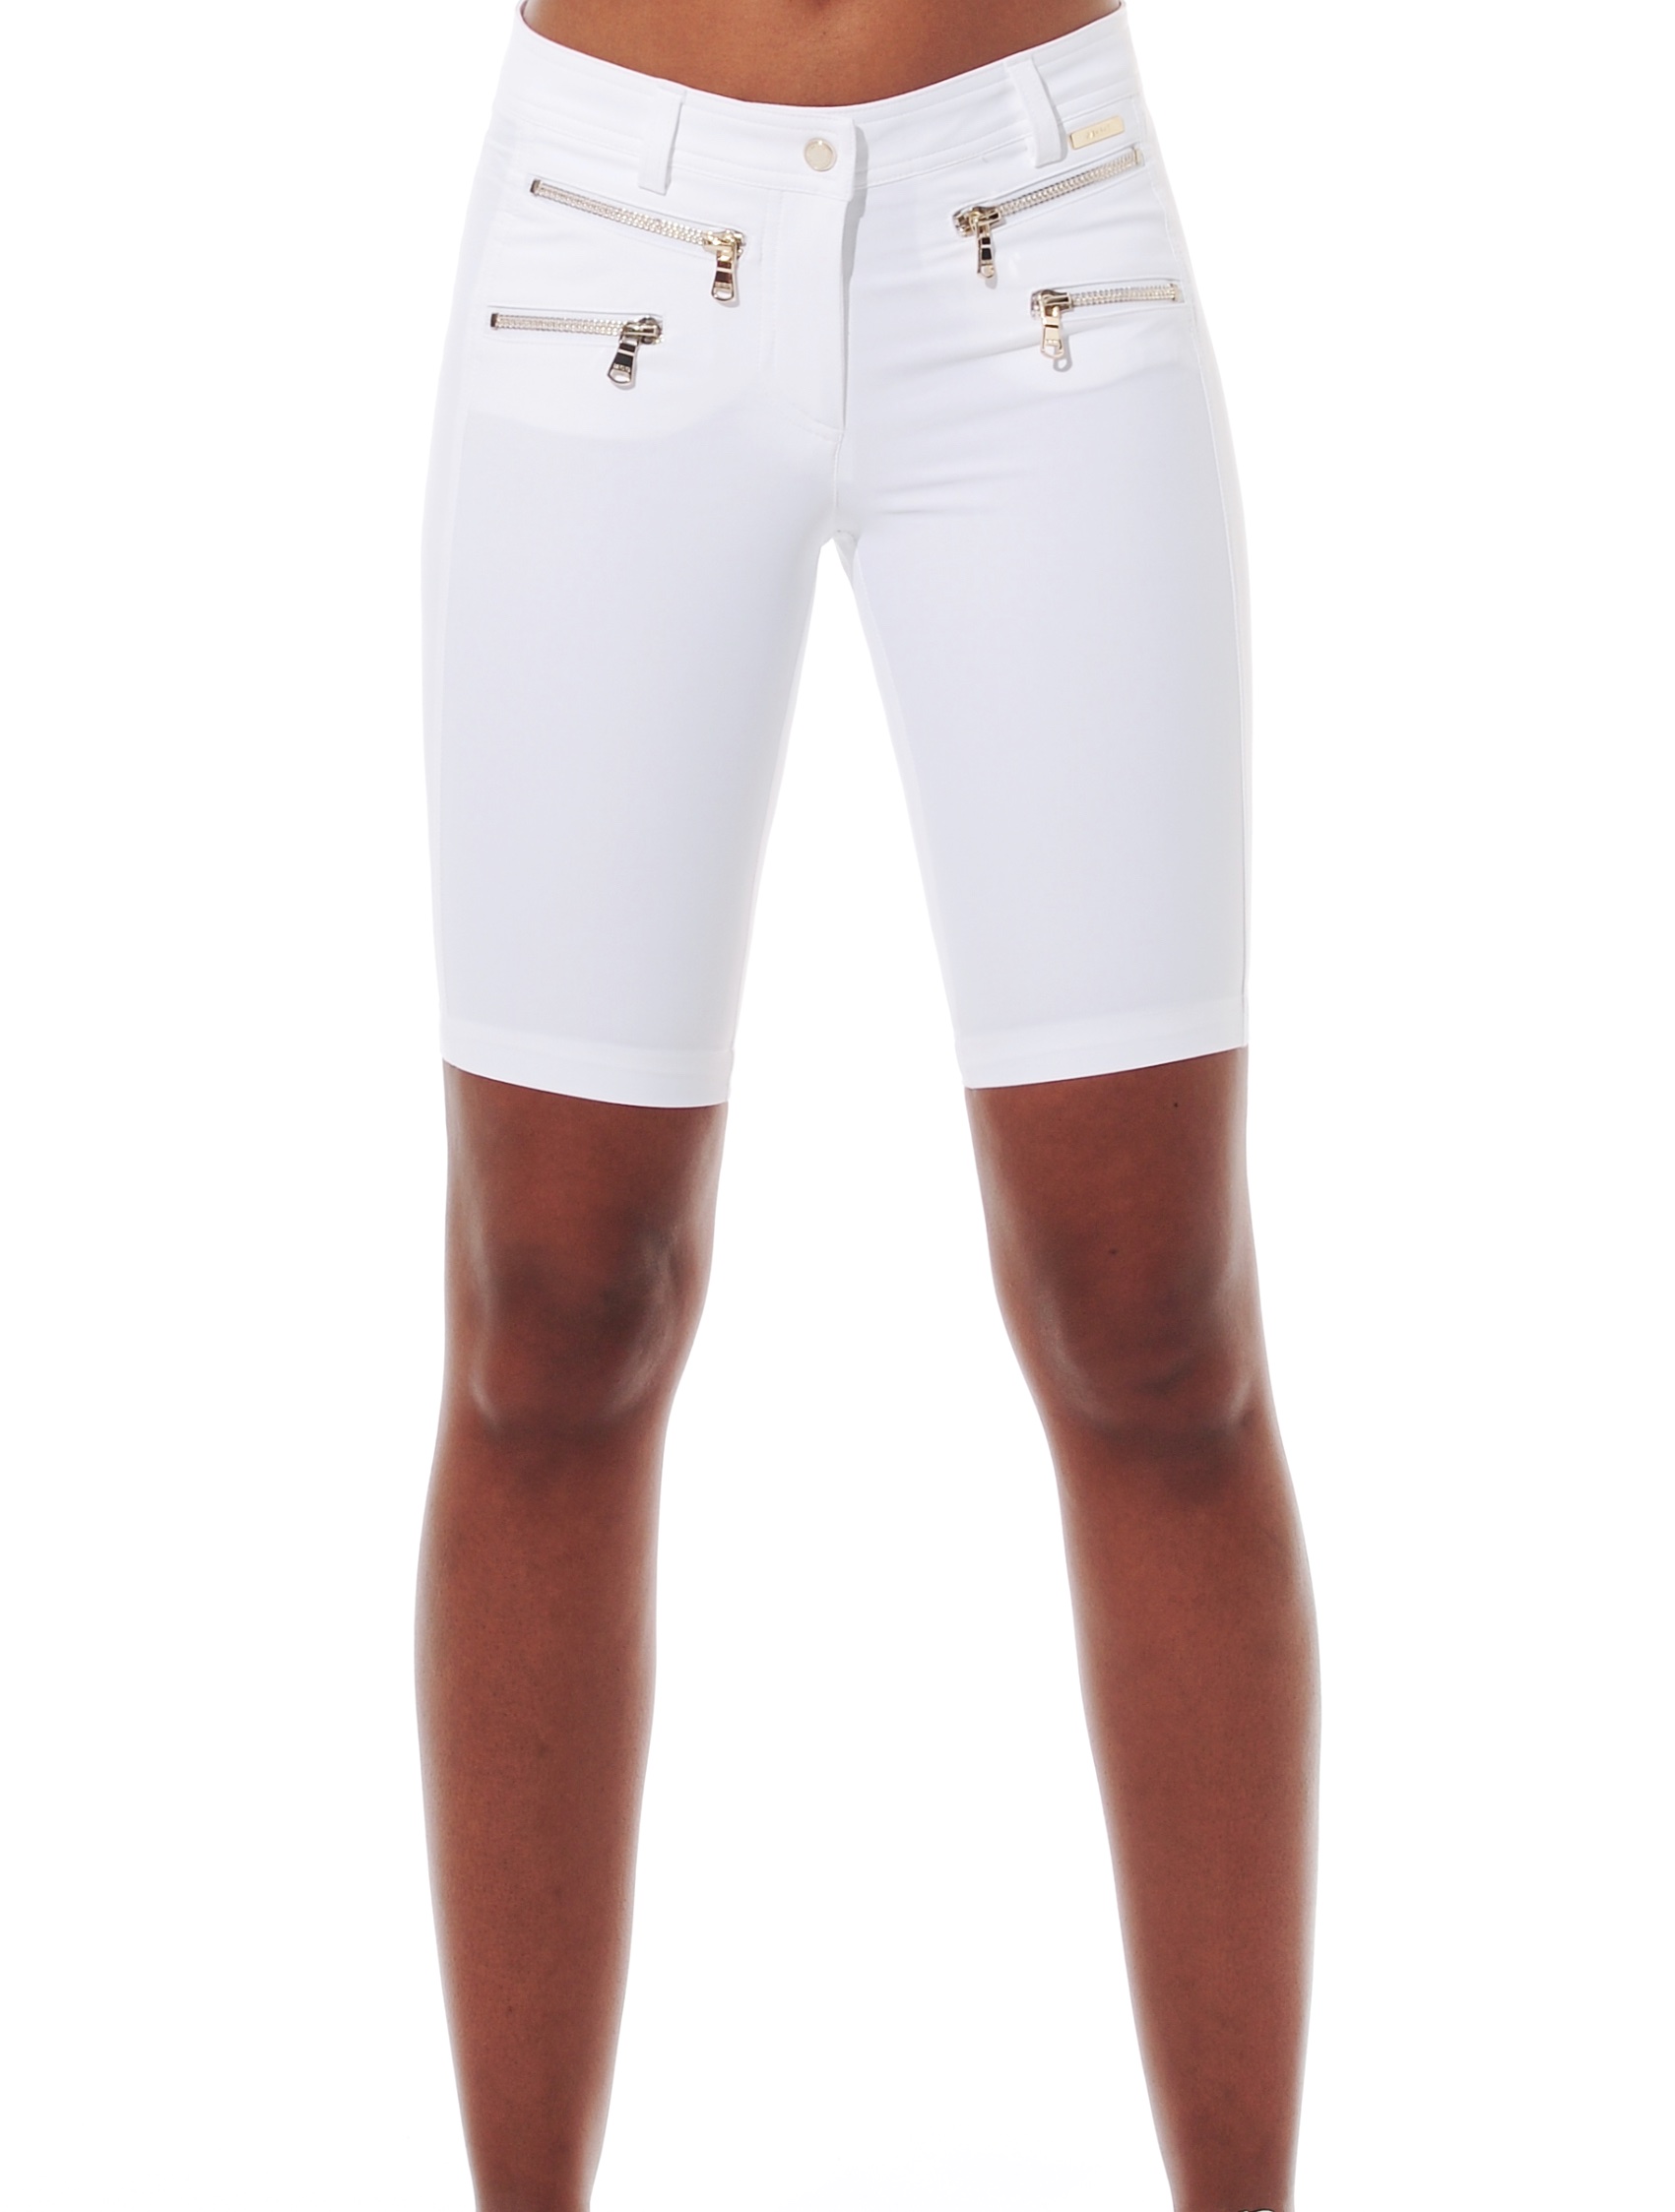 4way stretch double zip shorts white 